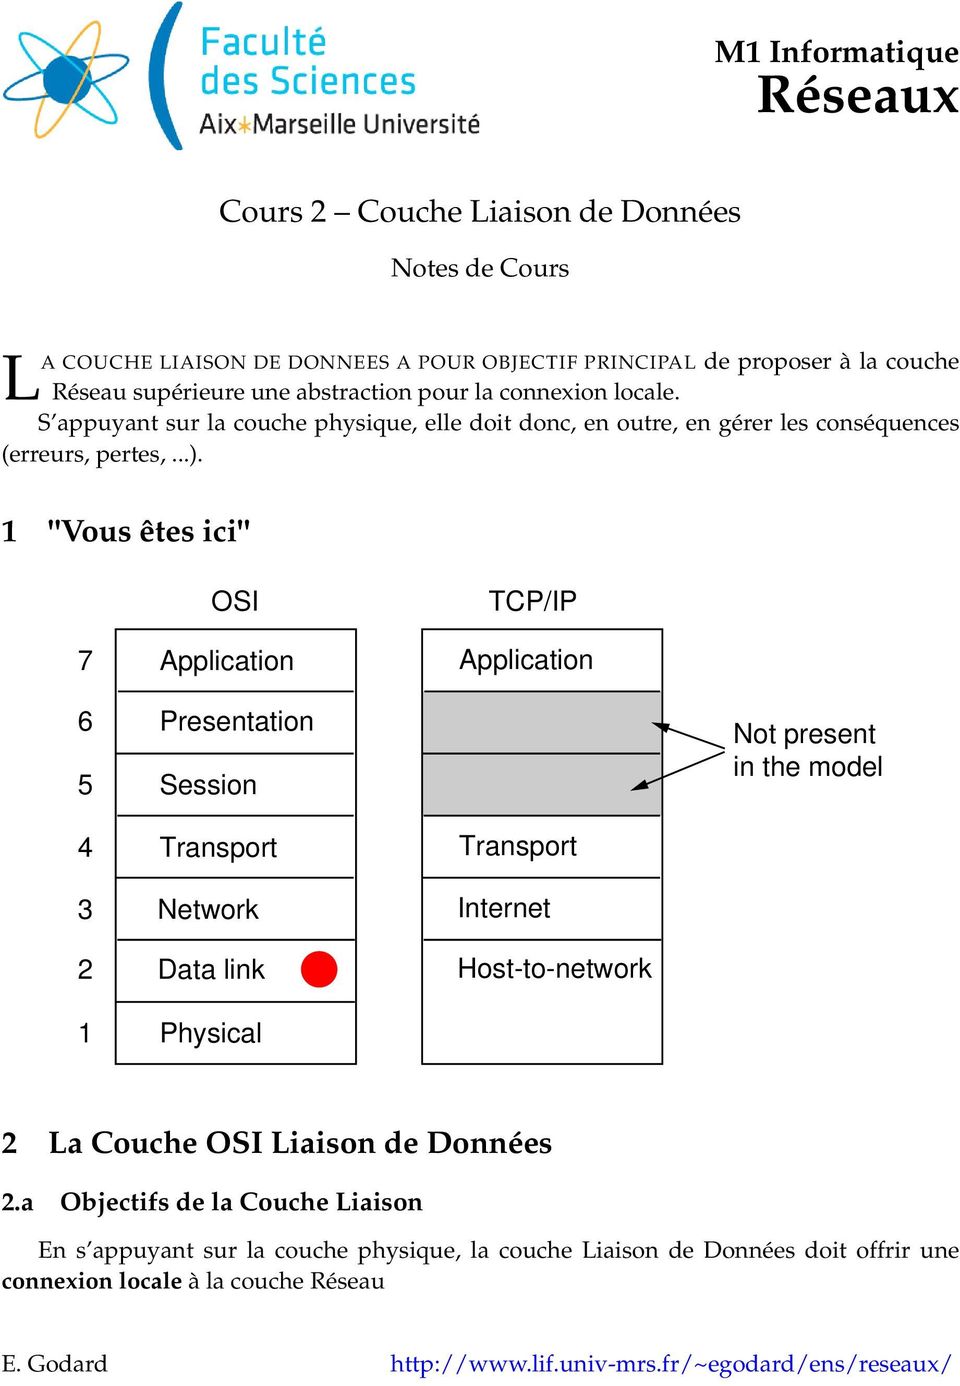 1 "Vous êtes ici" 7 OSI Application TCP/IP Application 6 5 Presentation Session Not present in the model 4 3 2 1 Transport Network Data link Physical Transport Internet Host-to-network 2